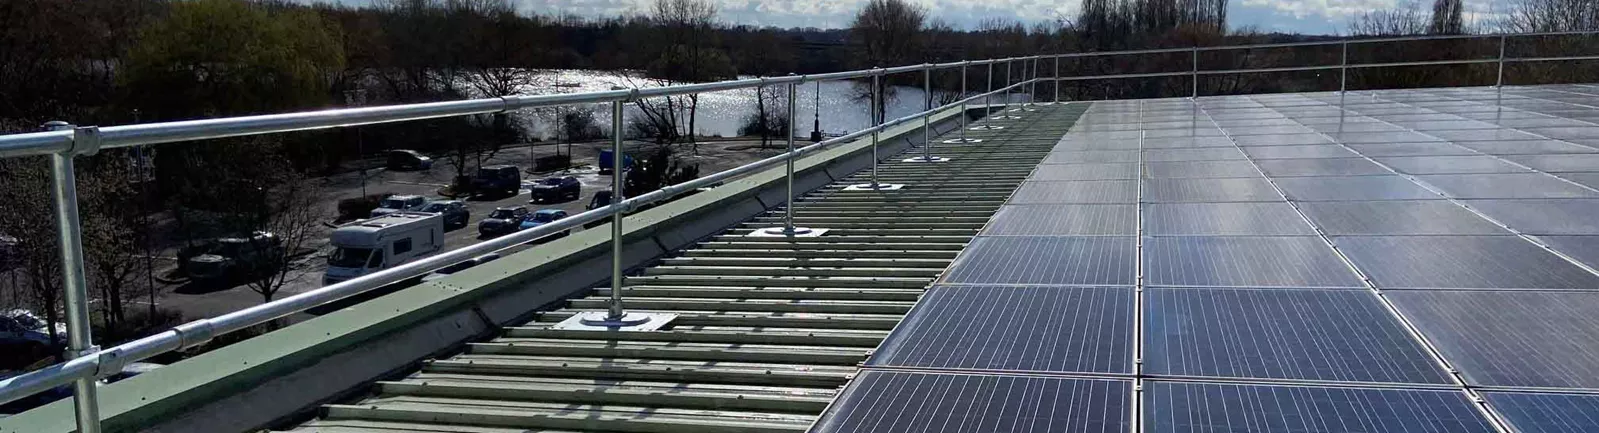 Roof Guardrail For Safe Solar Maintenance  | Fall Protection for Solar Maintenance